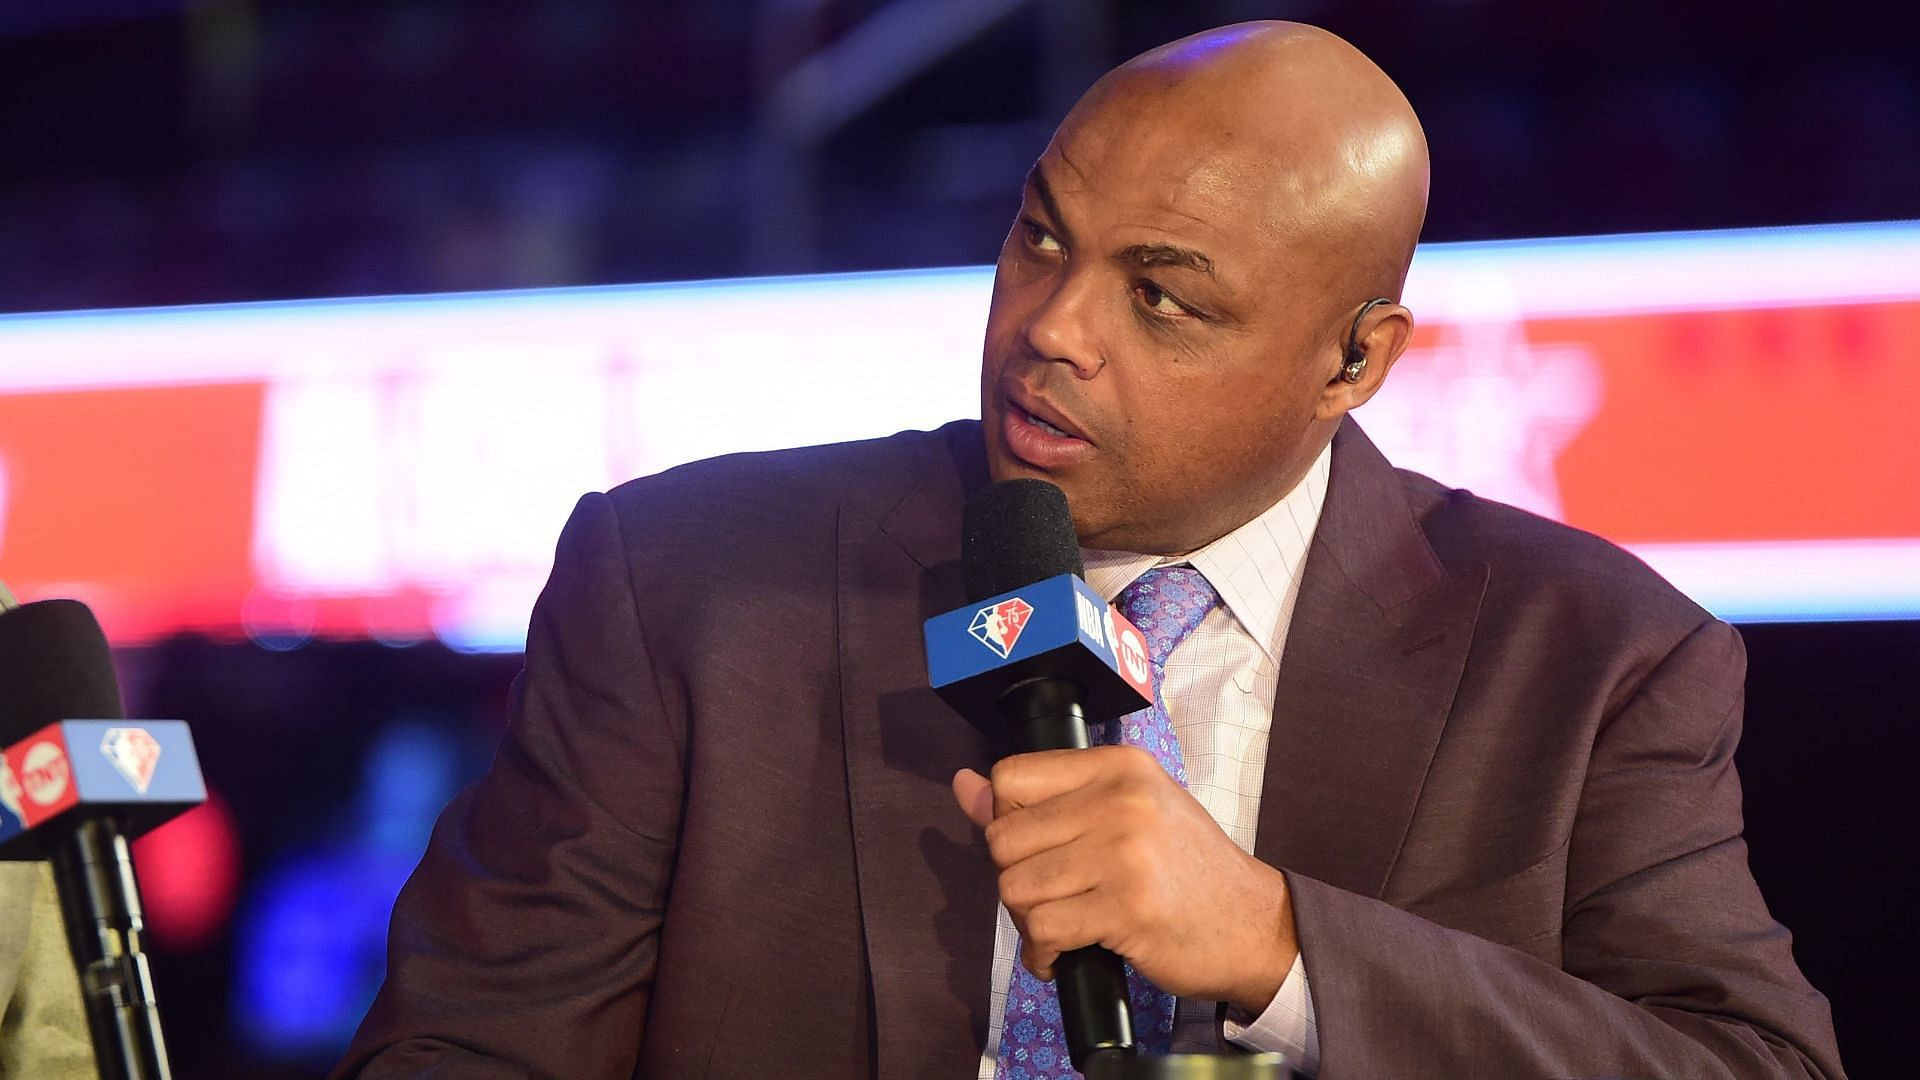 Former NBA player turned analyst Charles Barkley. [Photo source: Sporting News]